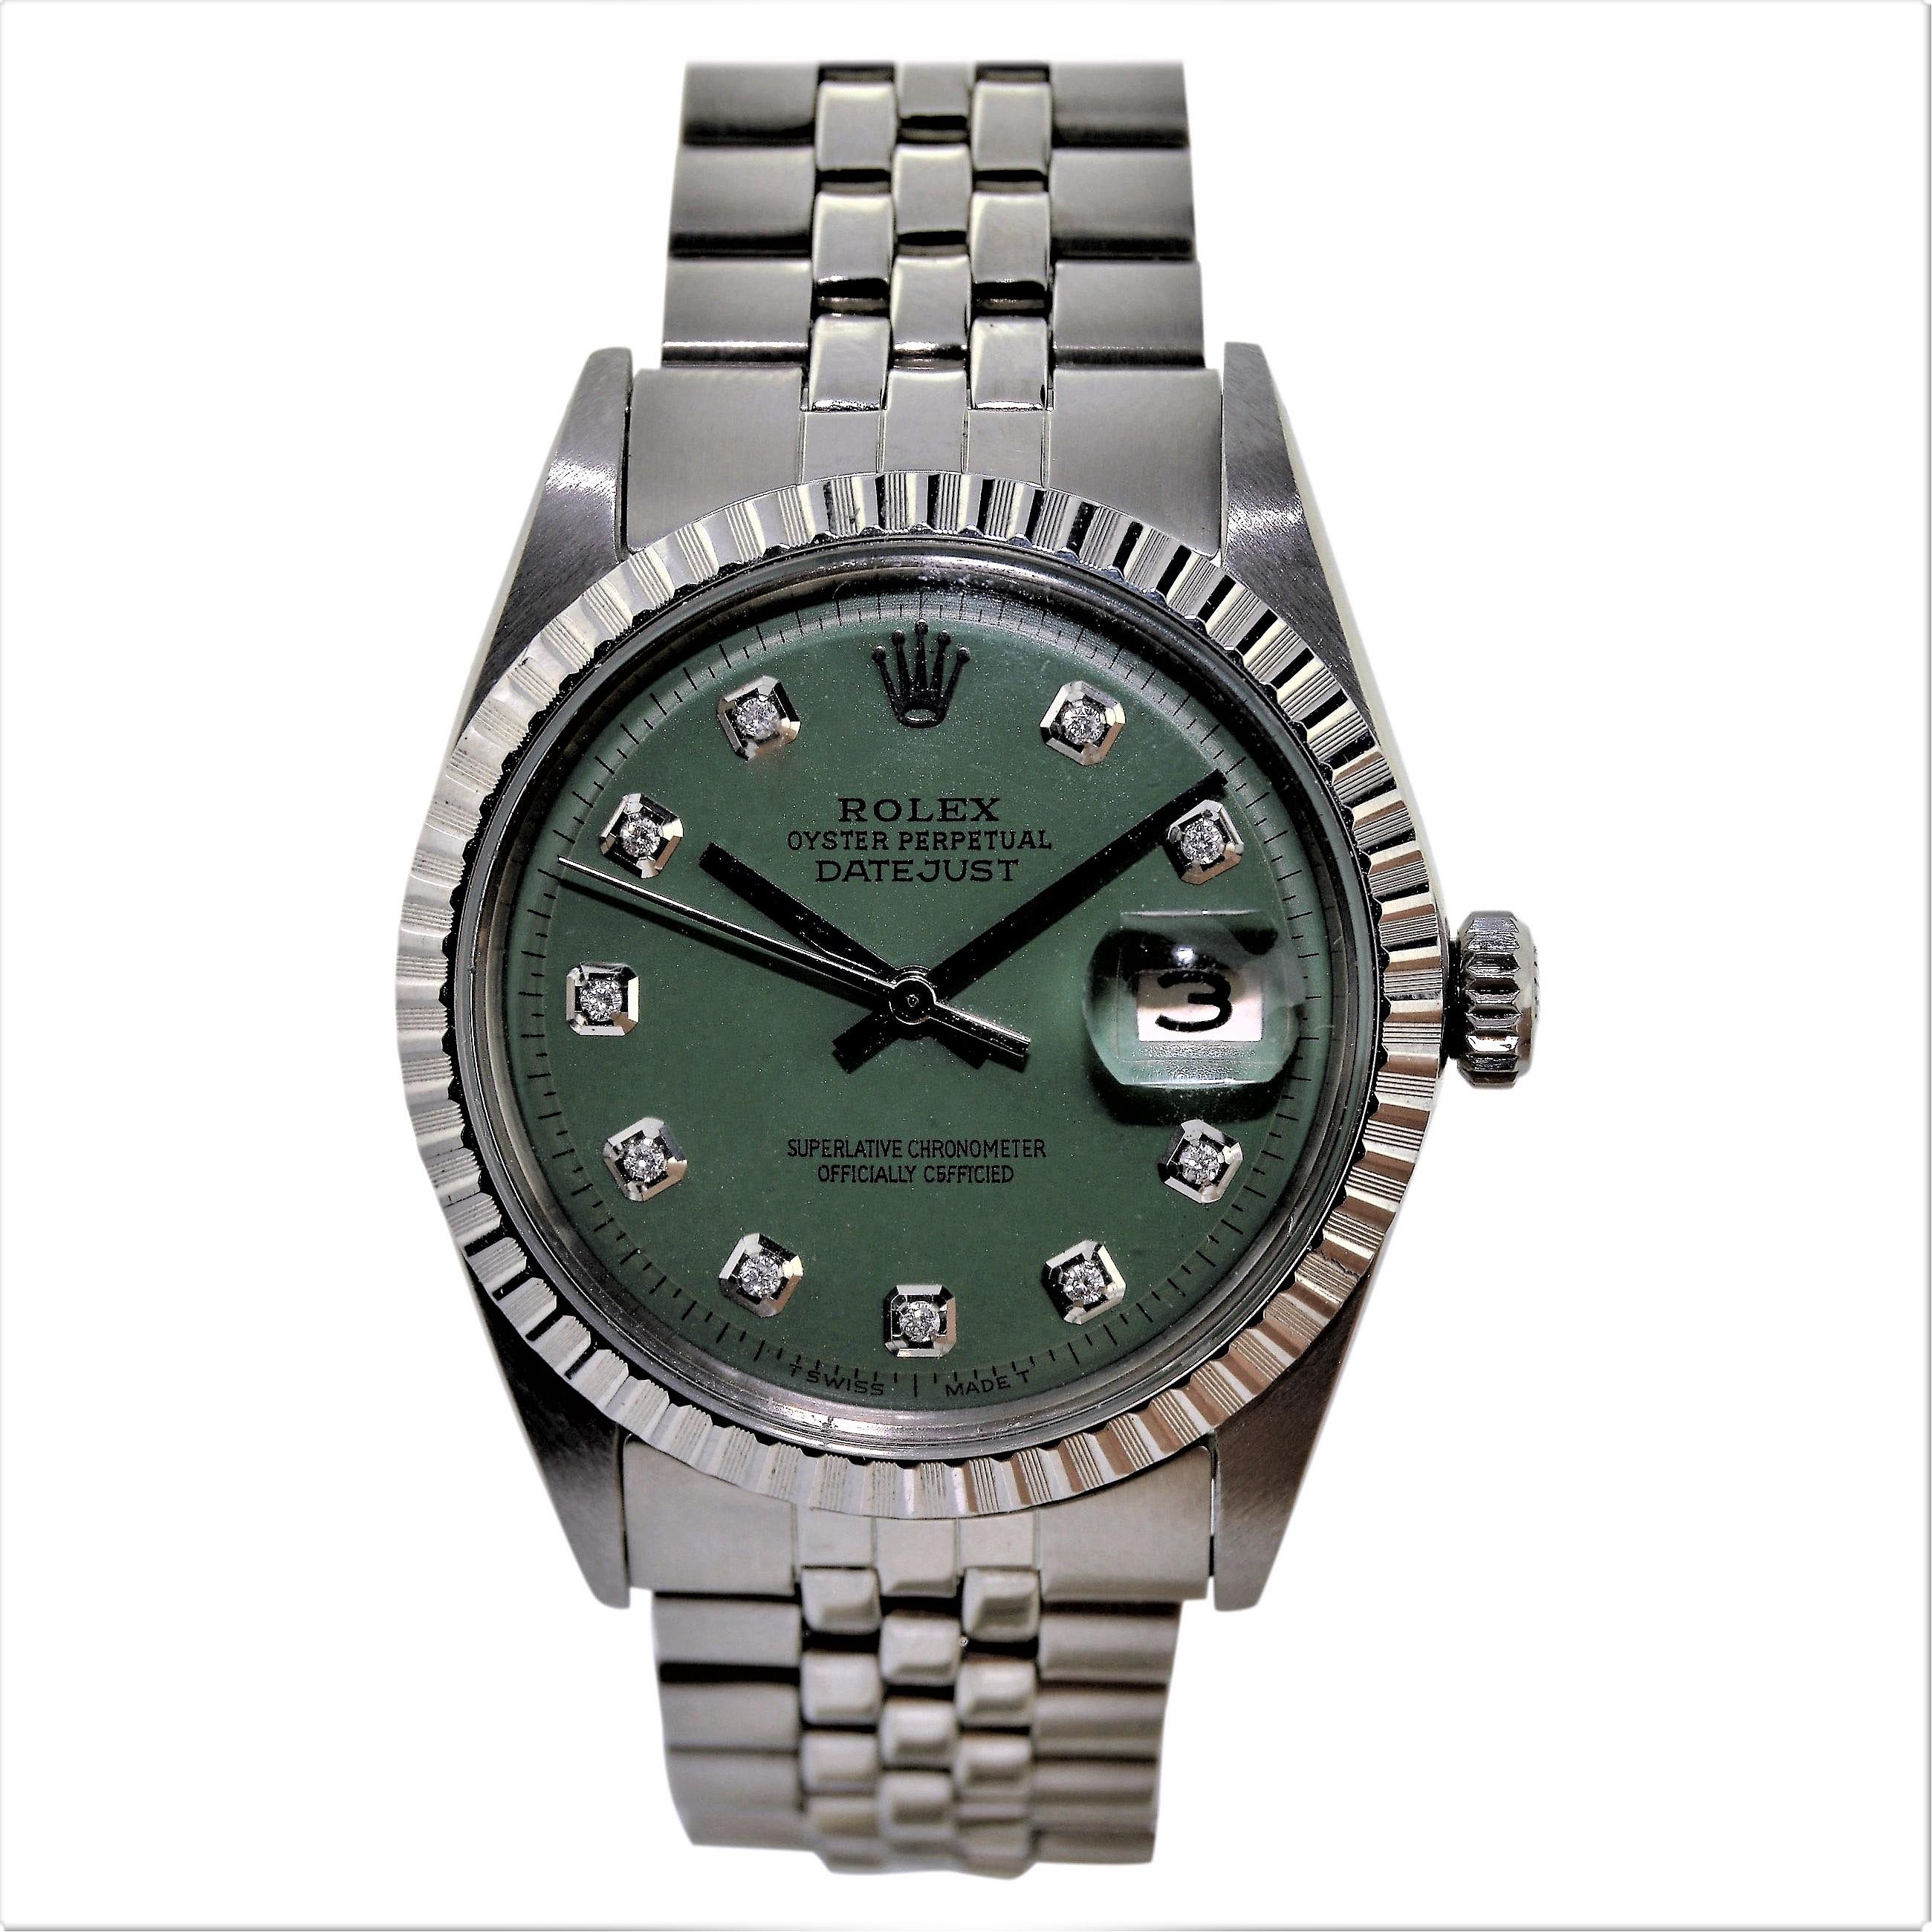 FACTORY / HOUSE: Rolex Watch  Company
STYLE / REFERENCE: Datejust / Reference 1601
METAL: Stainless Steel 
CIRCA: Late 1970'S
MOVEMENT / CALIBER: Perpetual, Automatic / 26 Jewels / Caliber 1570
DIAL / HANDS: Custom Replacement Diamond Dial / Baton